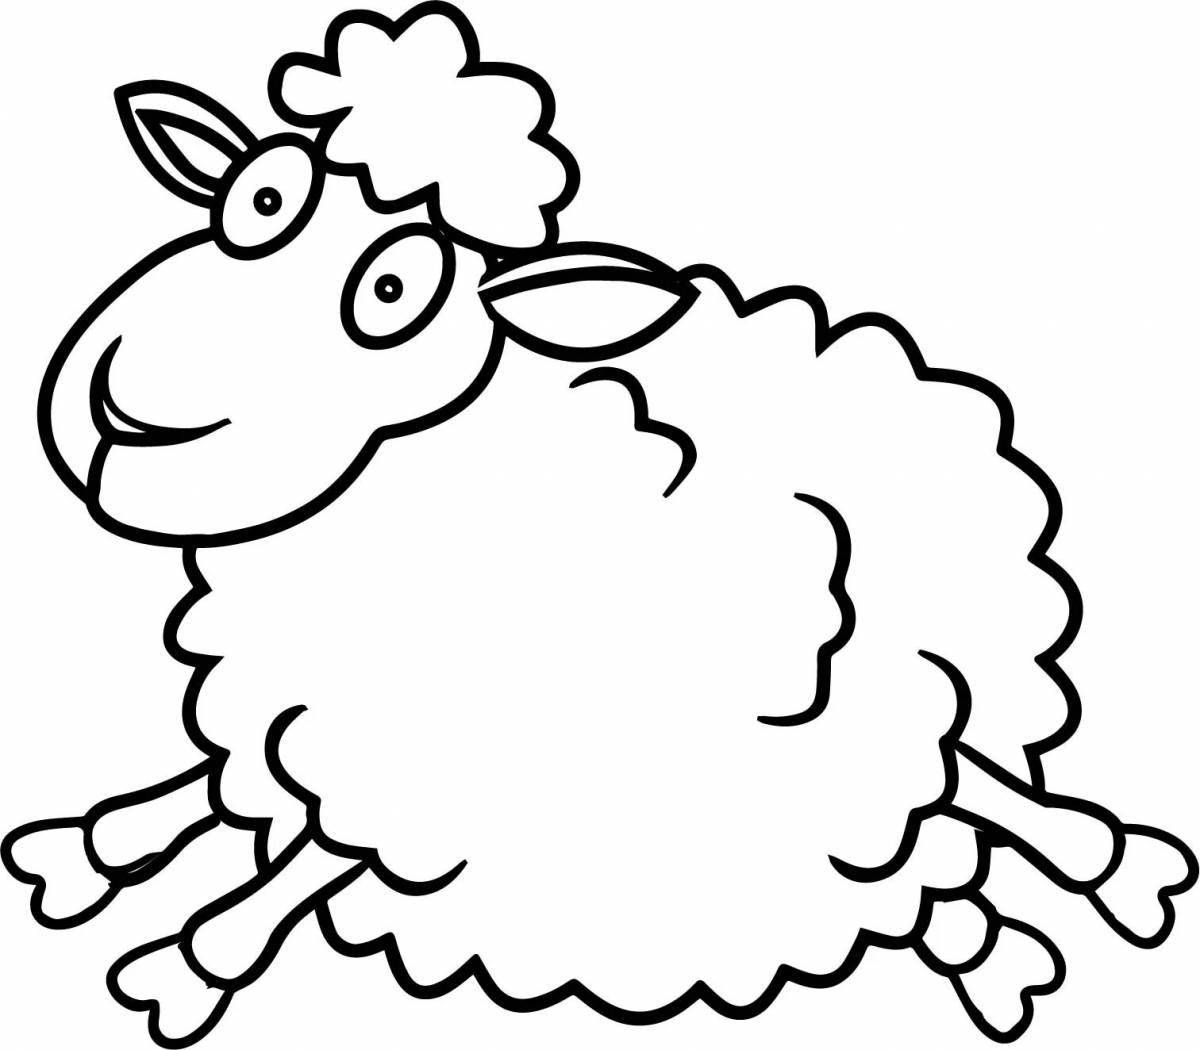 Playtime coloring page lamb for kids